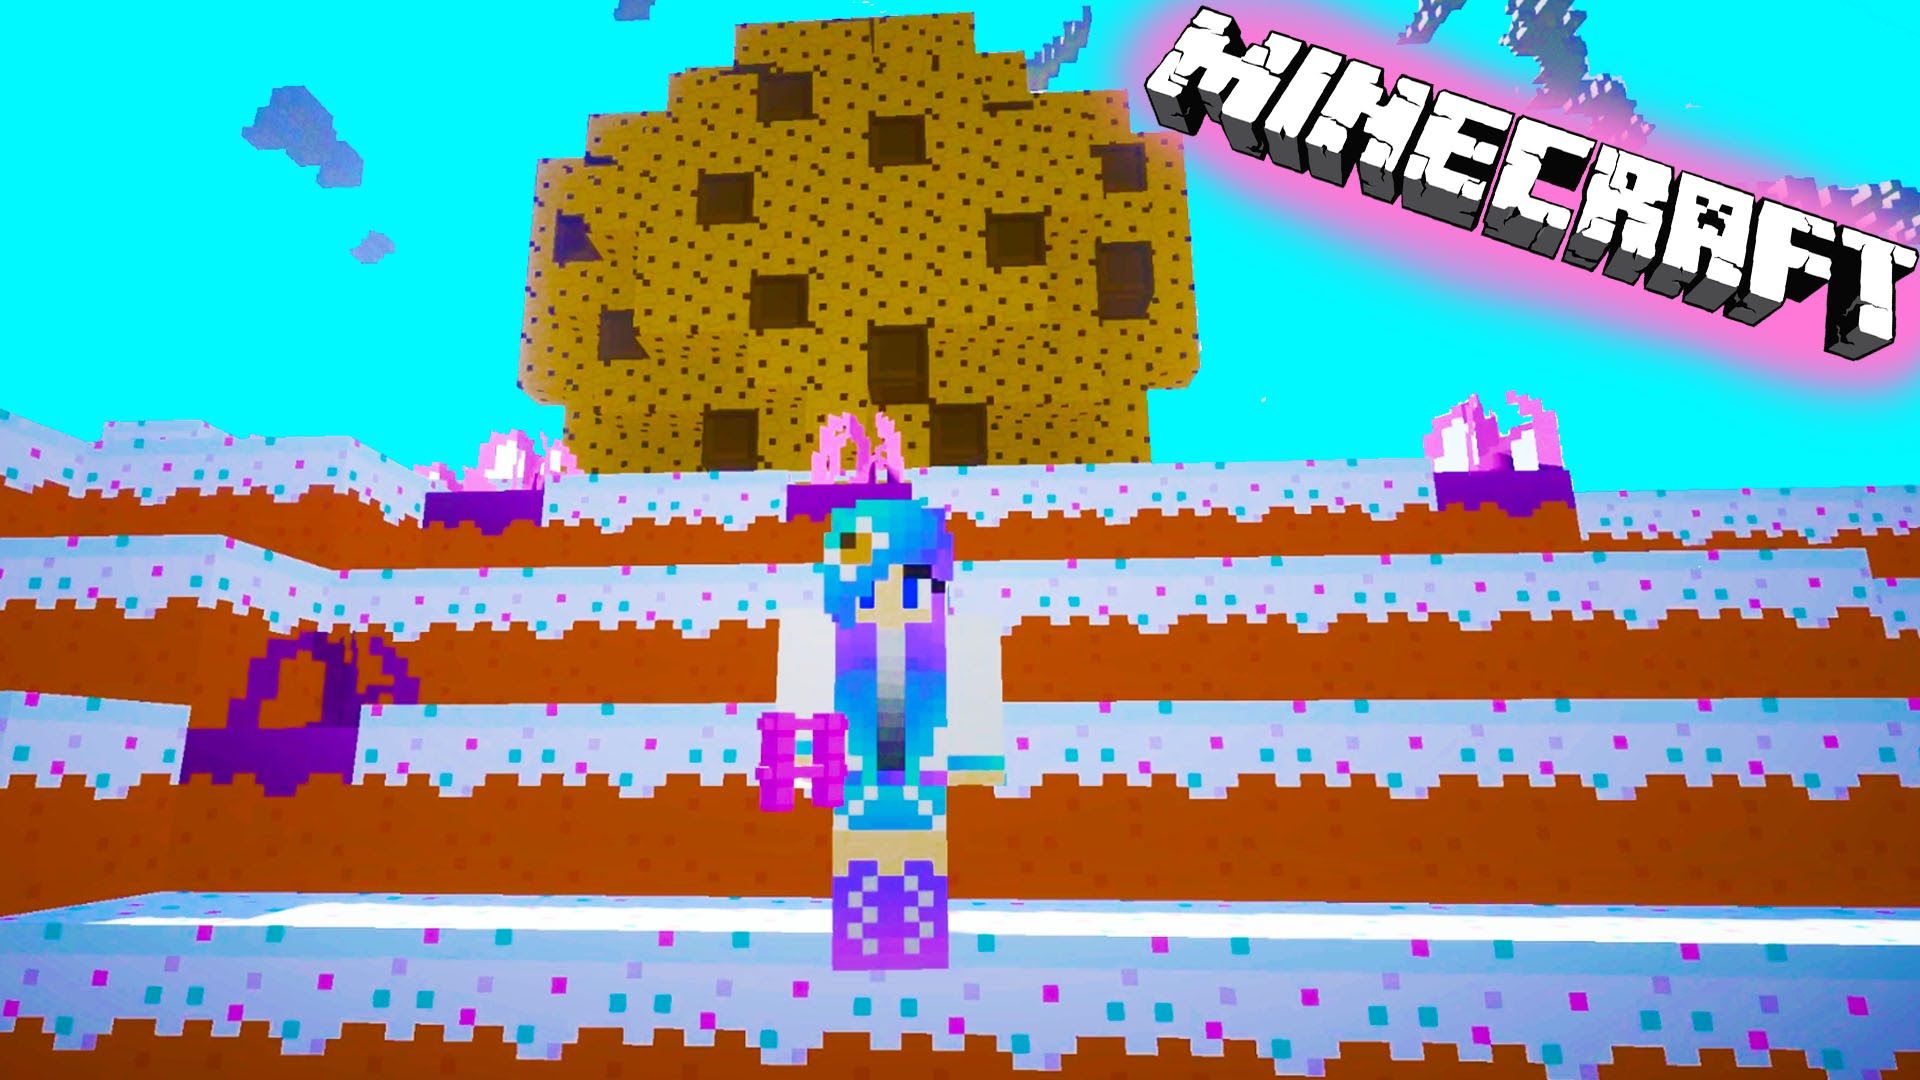 Cookieswirlc Plays Minecraft Candy Sugar Land Gaming Cake World Giant Co. Cookie swirl c, How to play minecraft, Cookie swirl c youtube